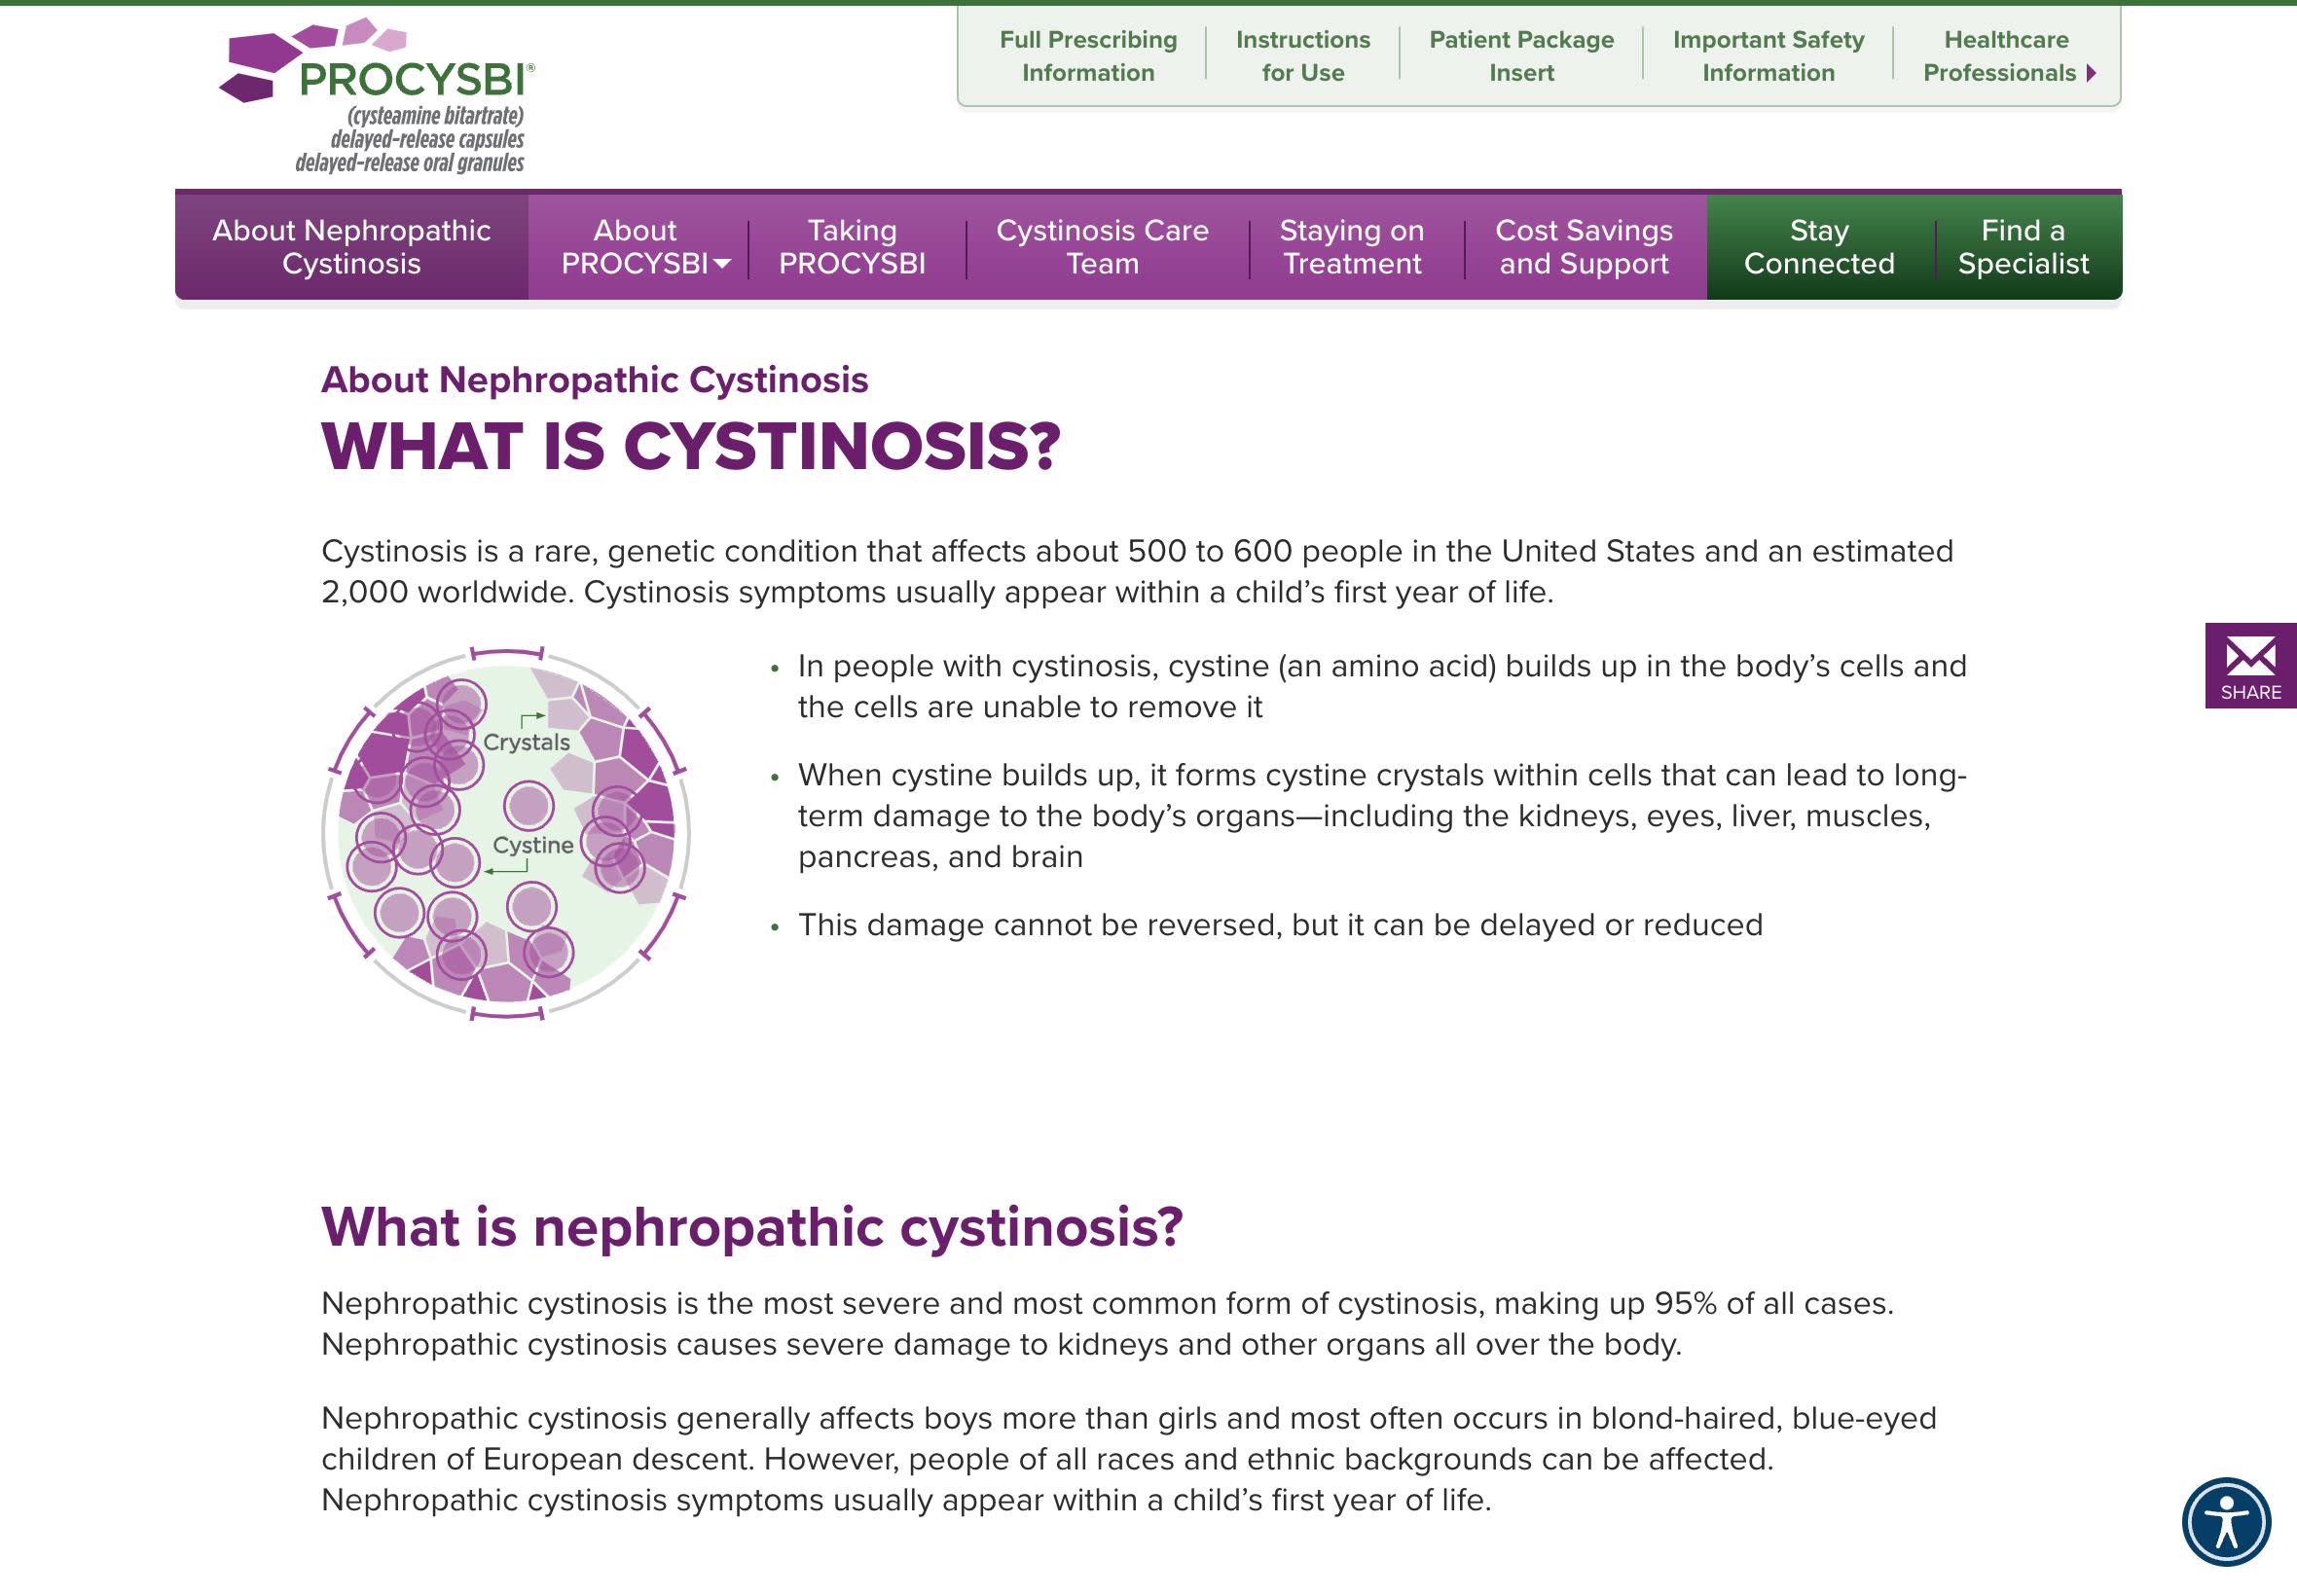 Nephropathic-Cystinosis-Symptoms-Tests-and-Management-PROCYSBI®-cysteamine-bitartrate-